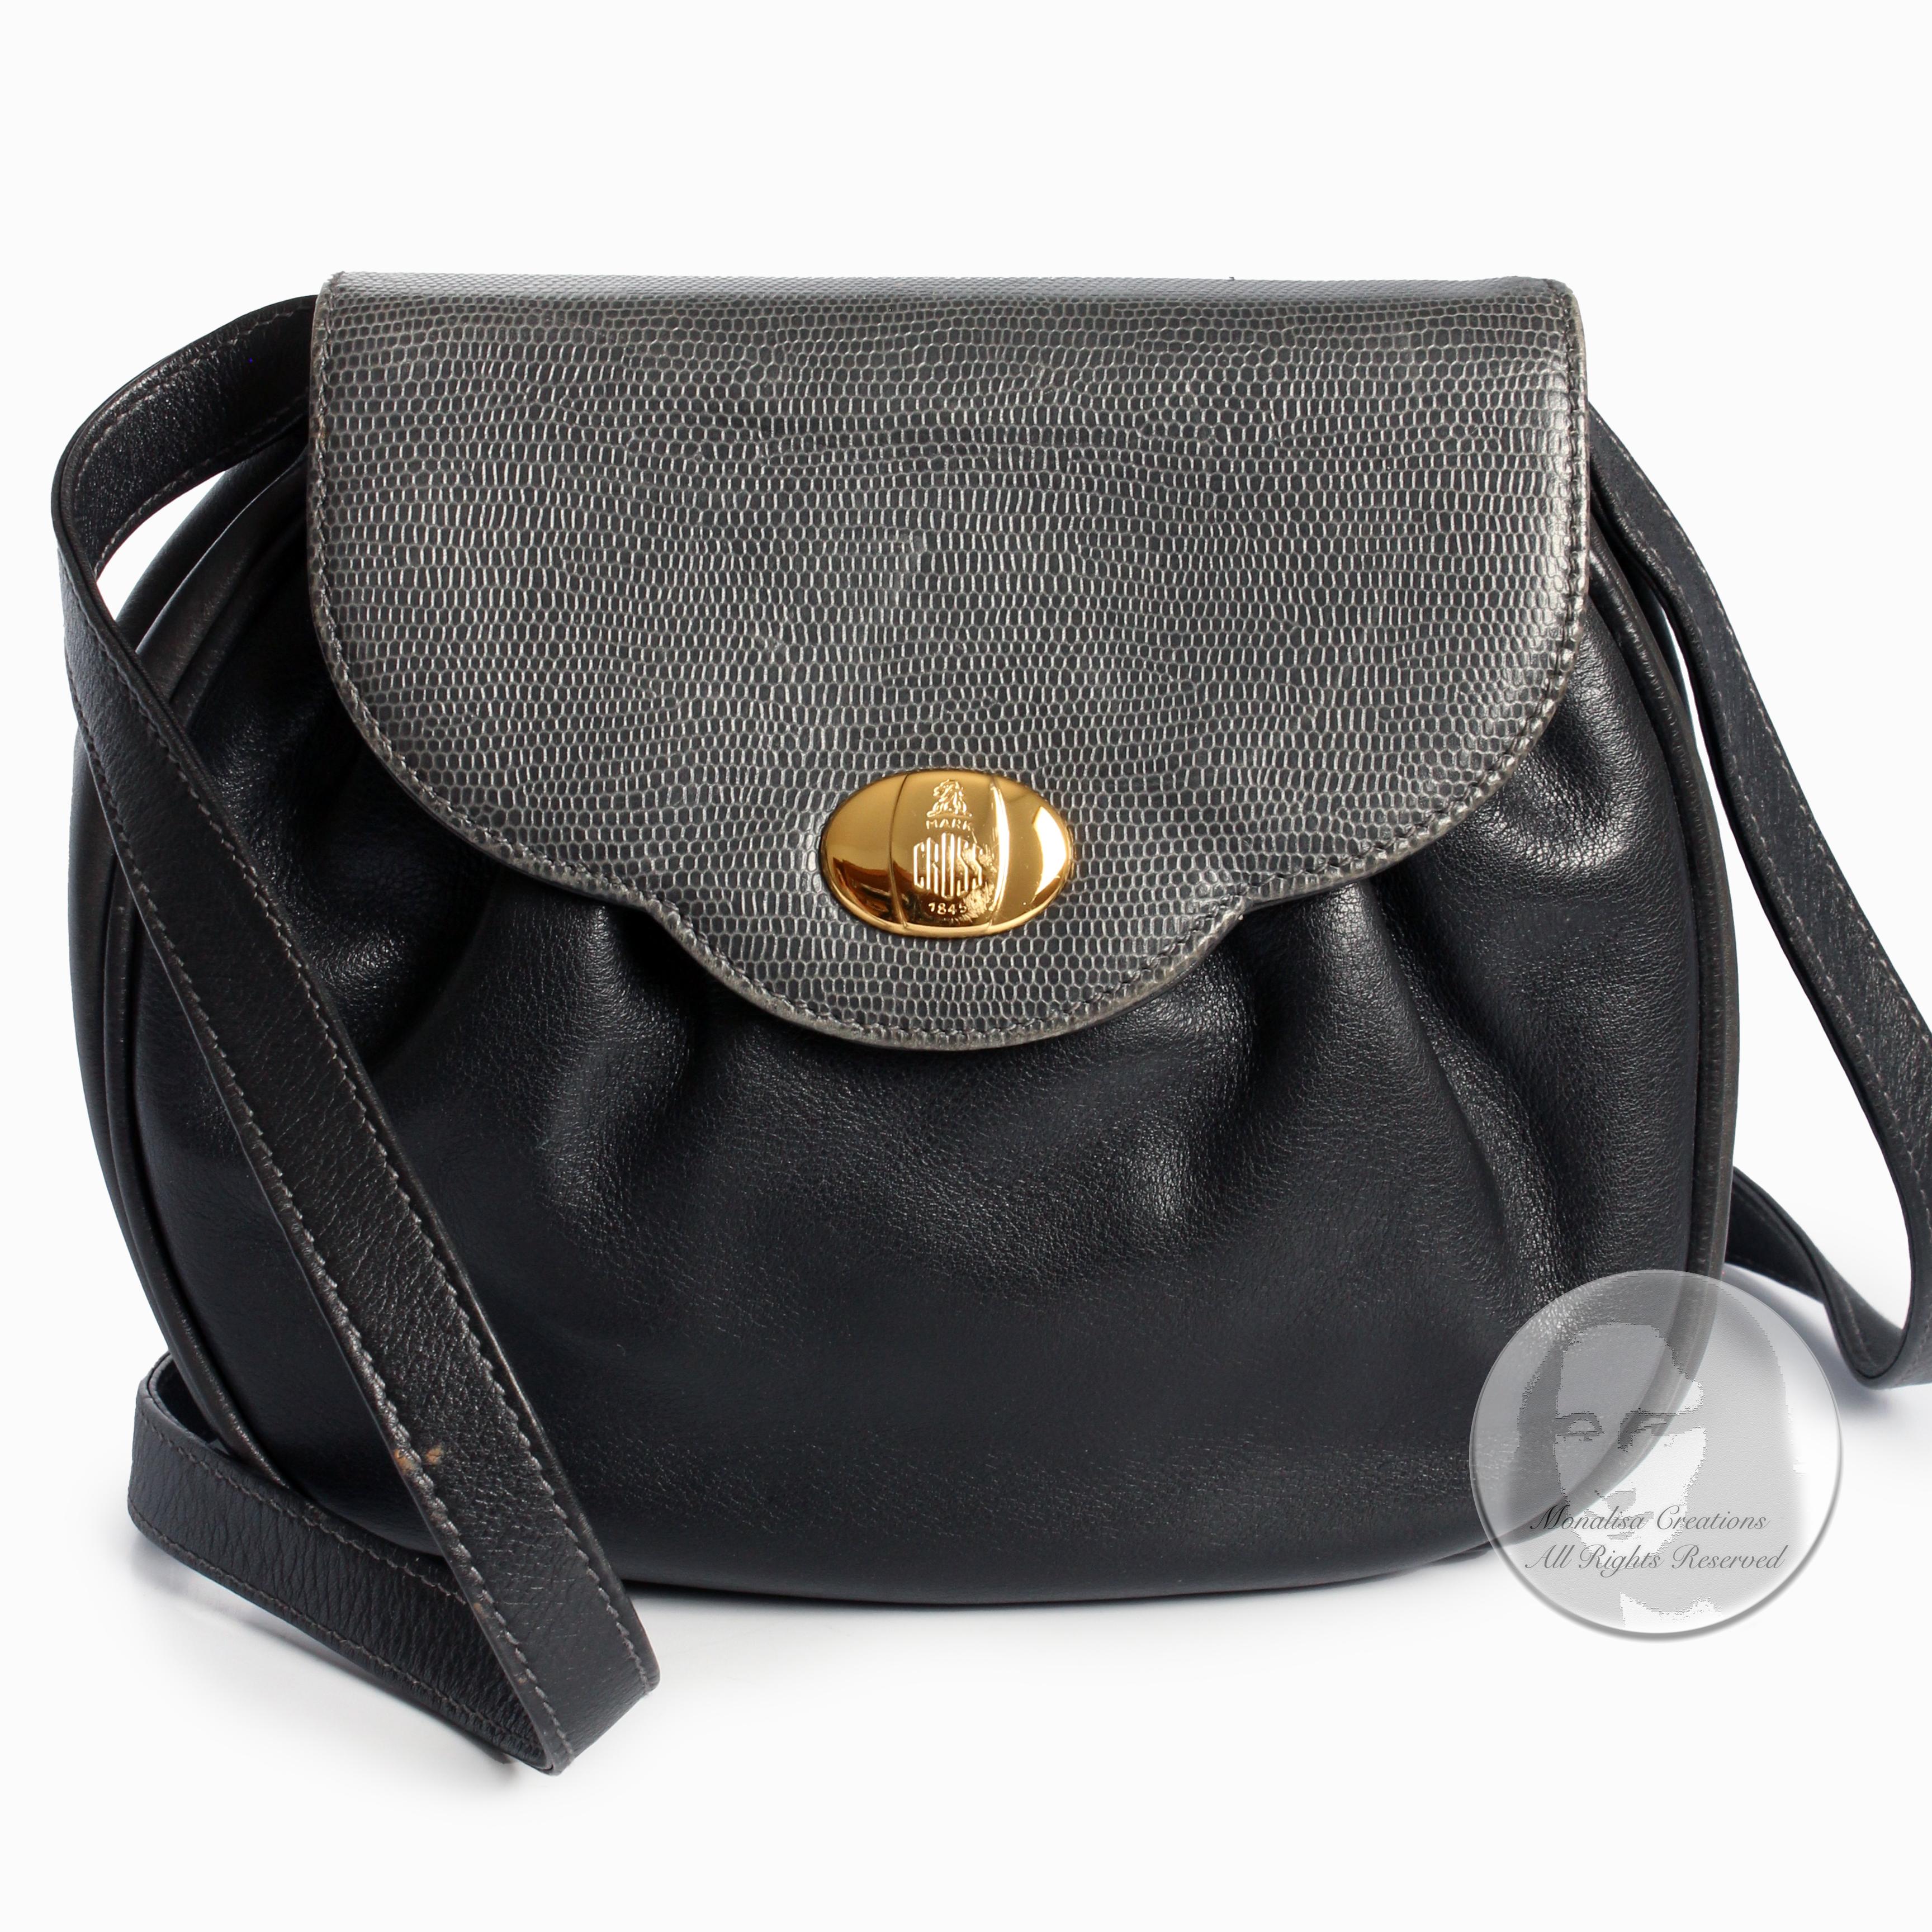 Authentic, preowned, vintage Mark Cross clutch or convertible crossbody bag, likely made in the 90s. Made from black leather with a lizard embossed top flap, it features a magnetic clasp, and a non-adjustable and non-removable strap that can be